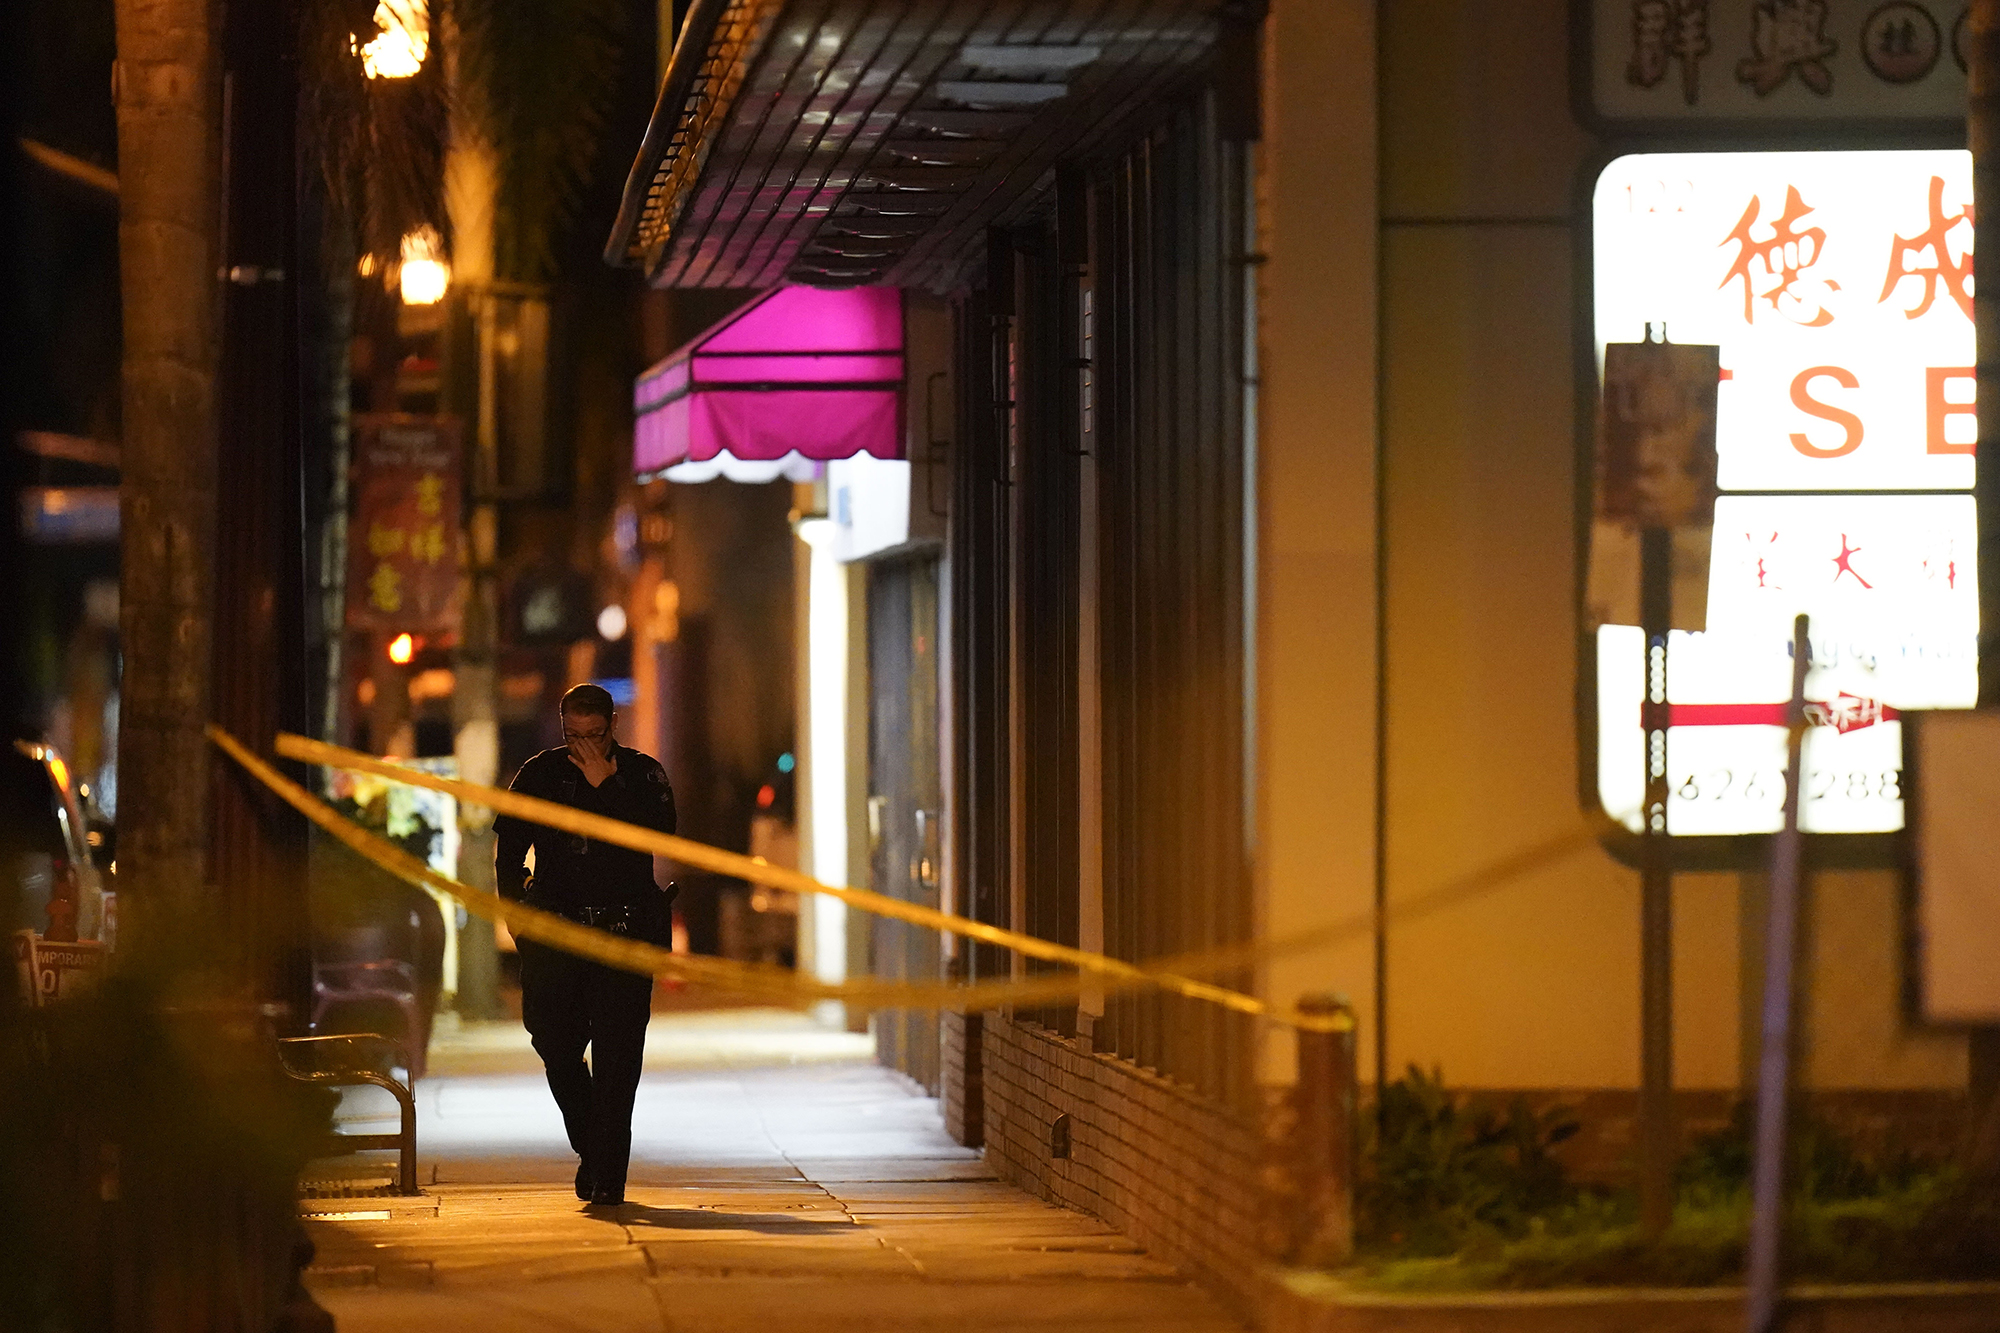 A police officer walks near the scene of the shooting.